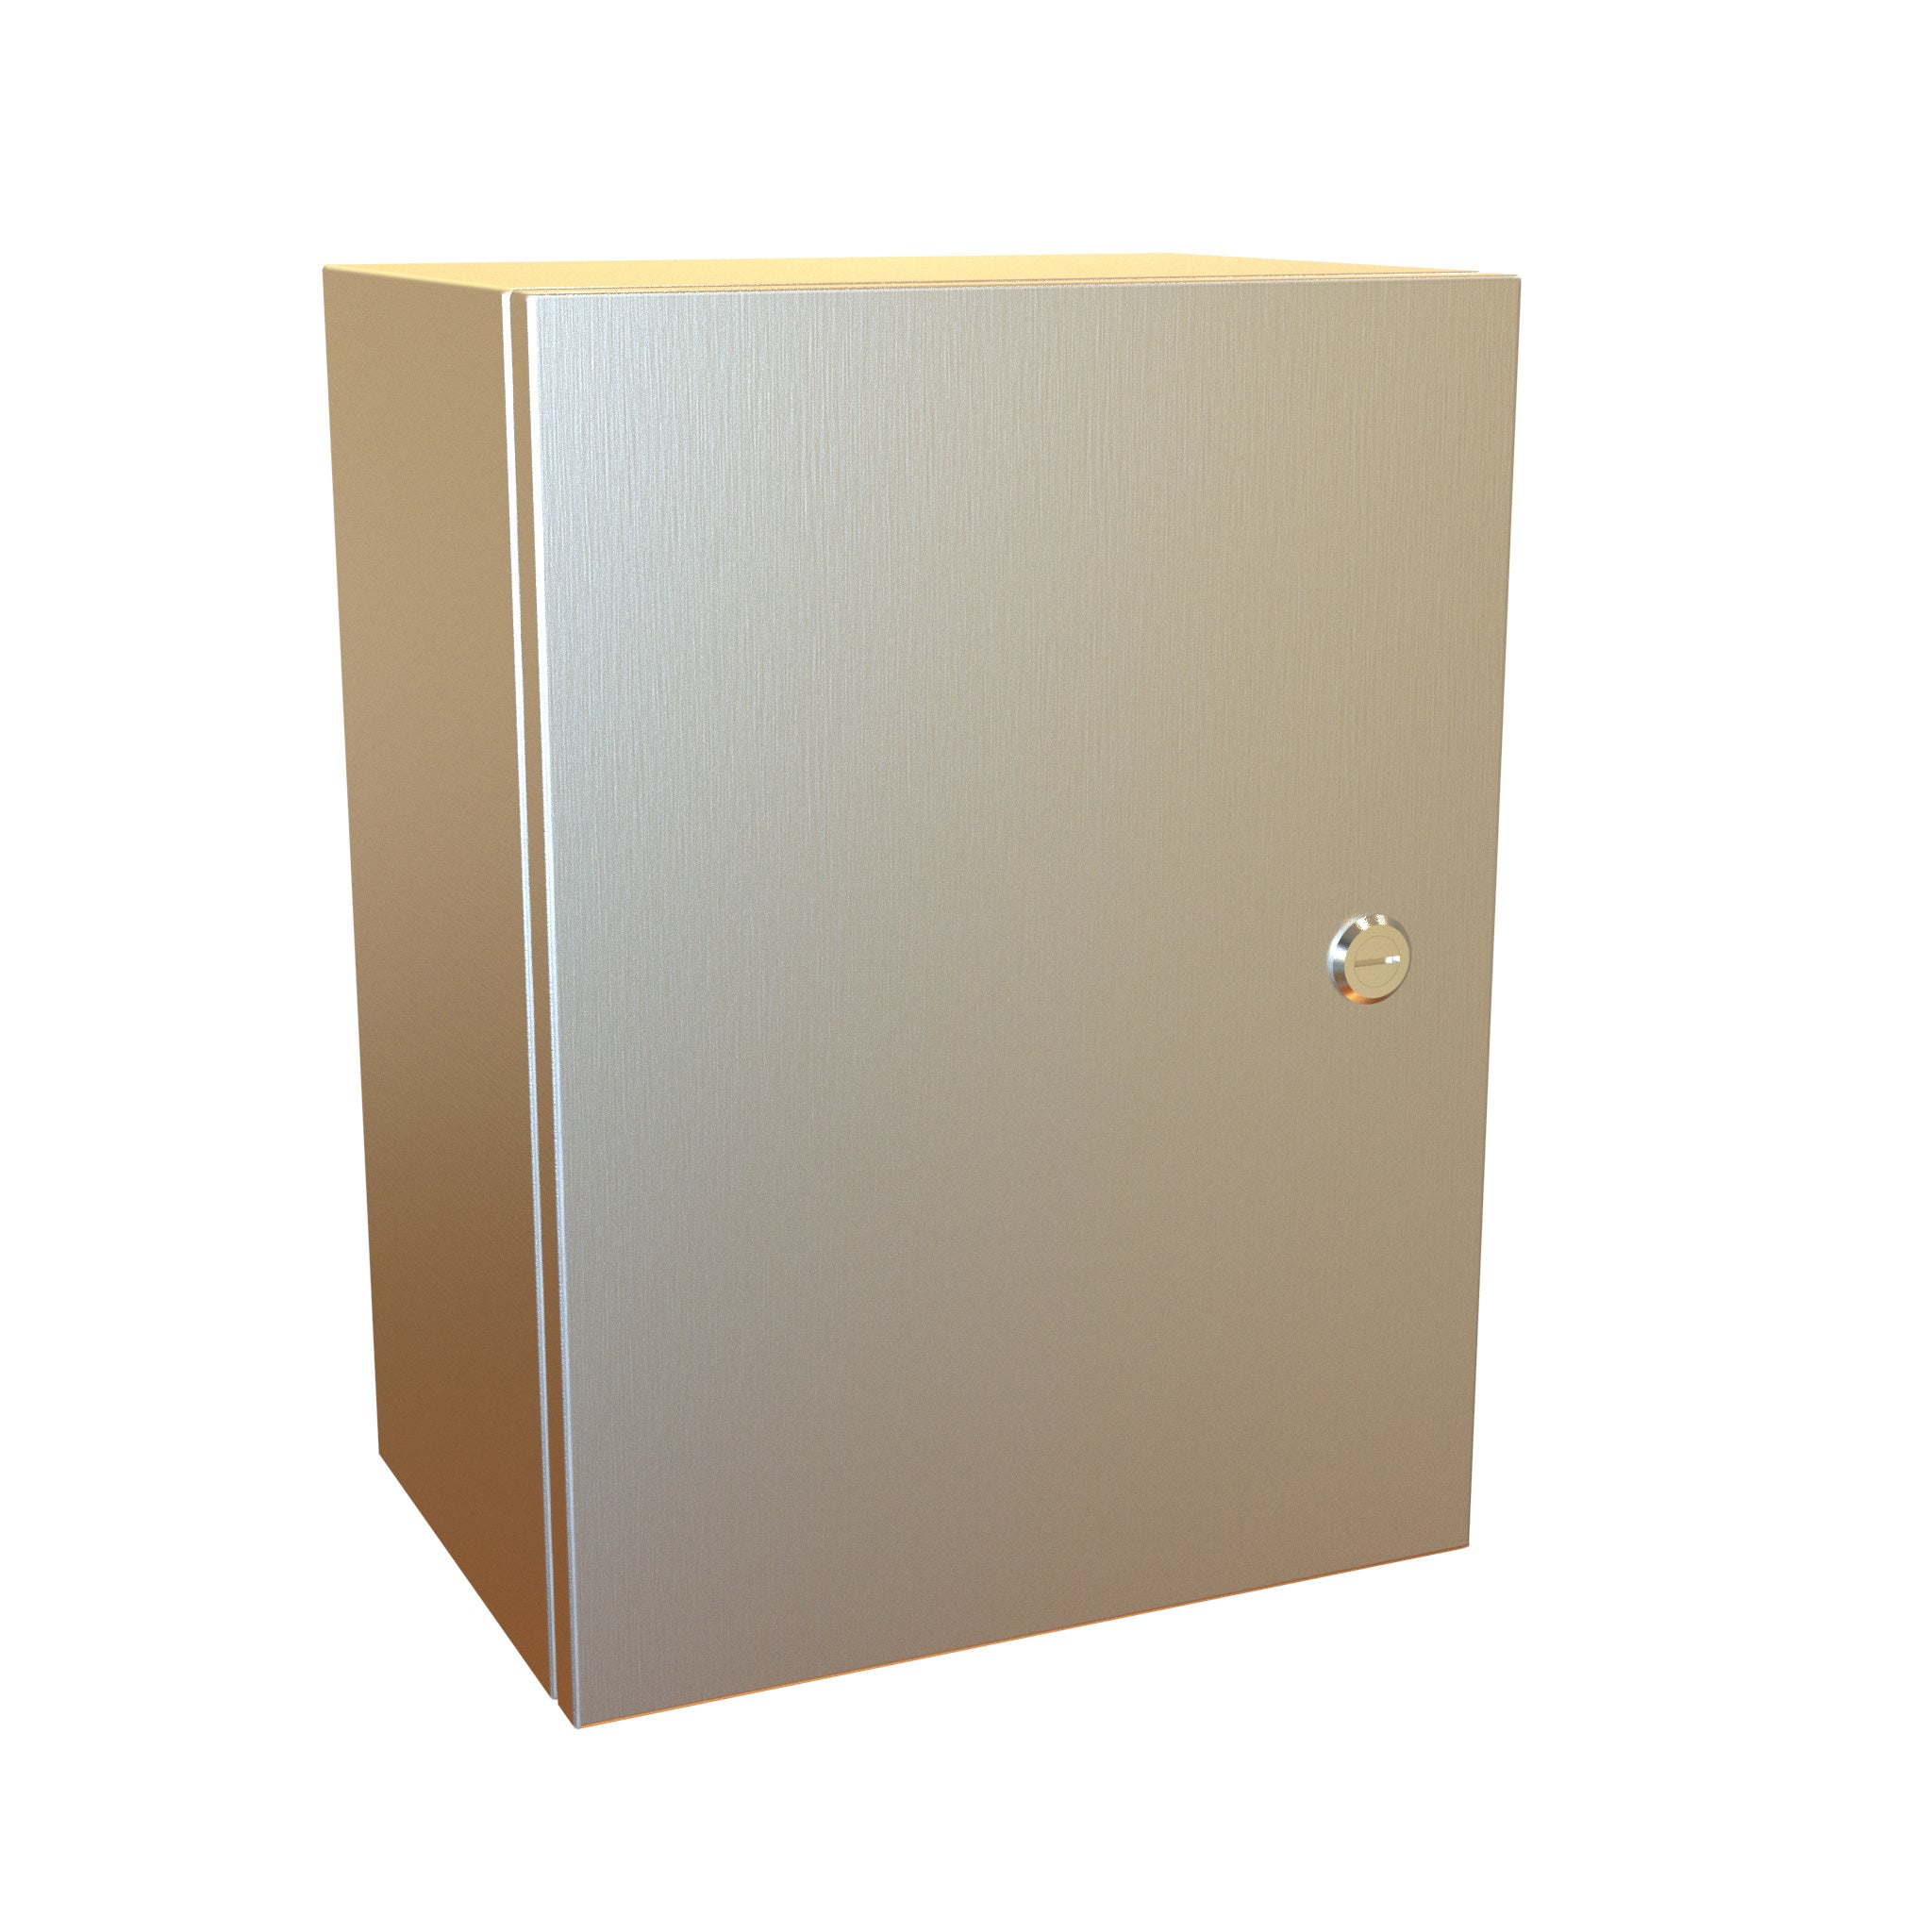 Type 4X Wallmount Enclosure Eclipse Series 316 Stainless Steel - 0